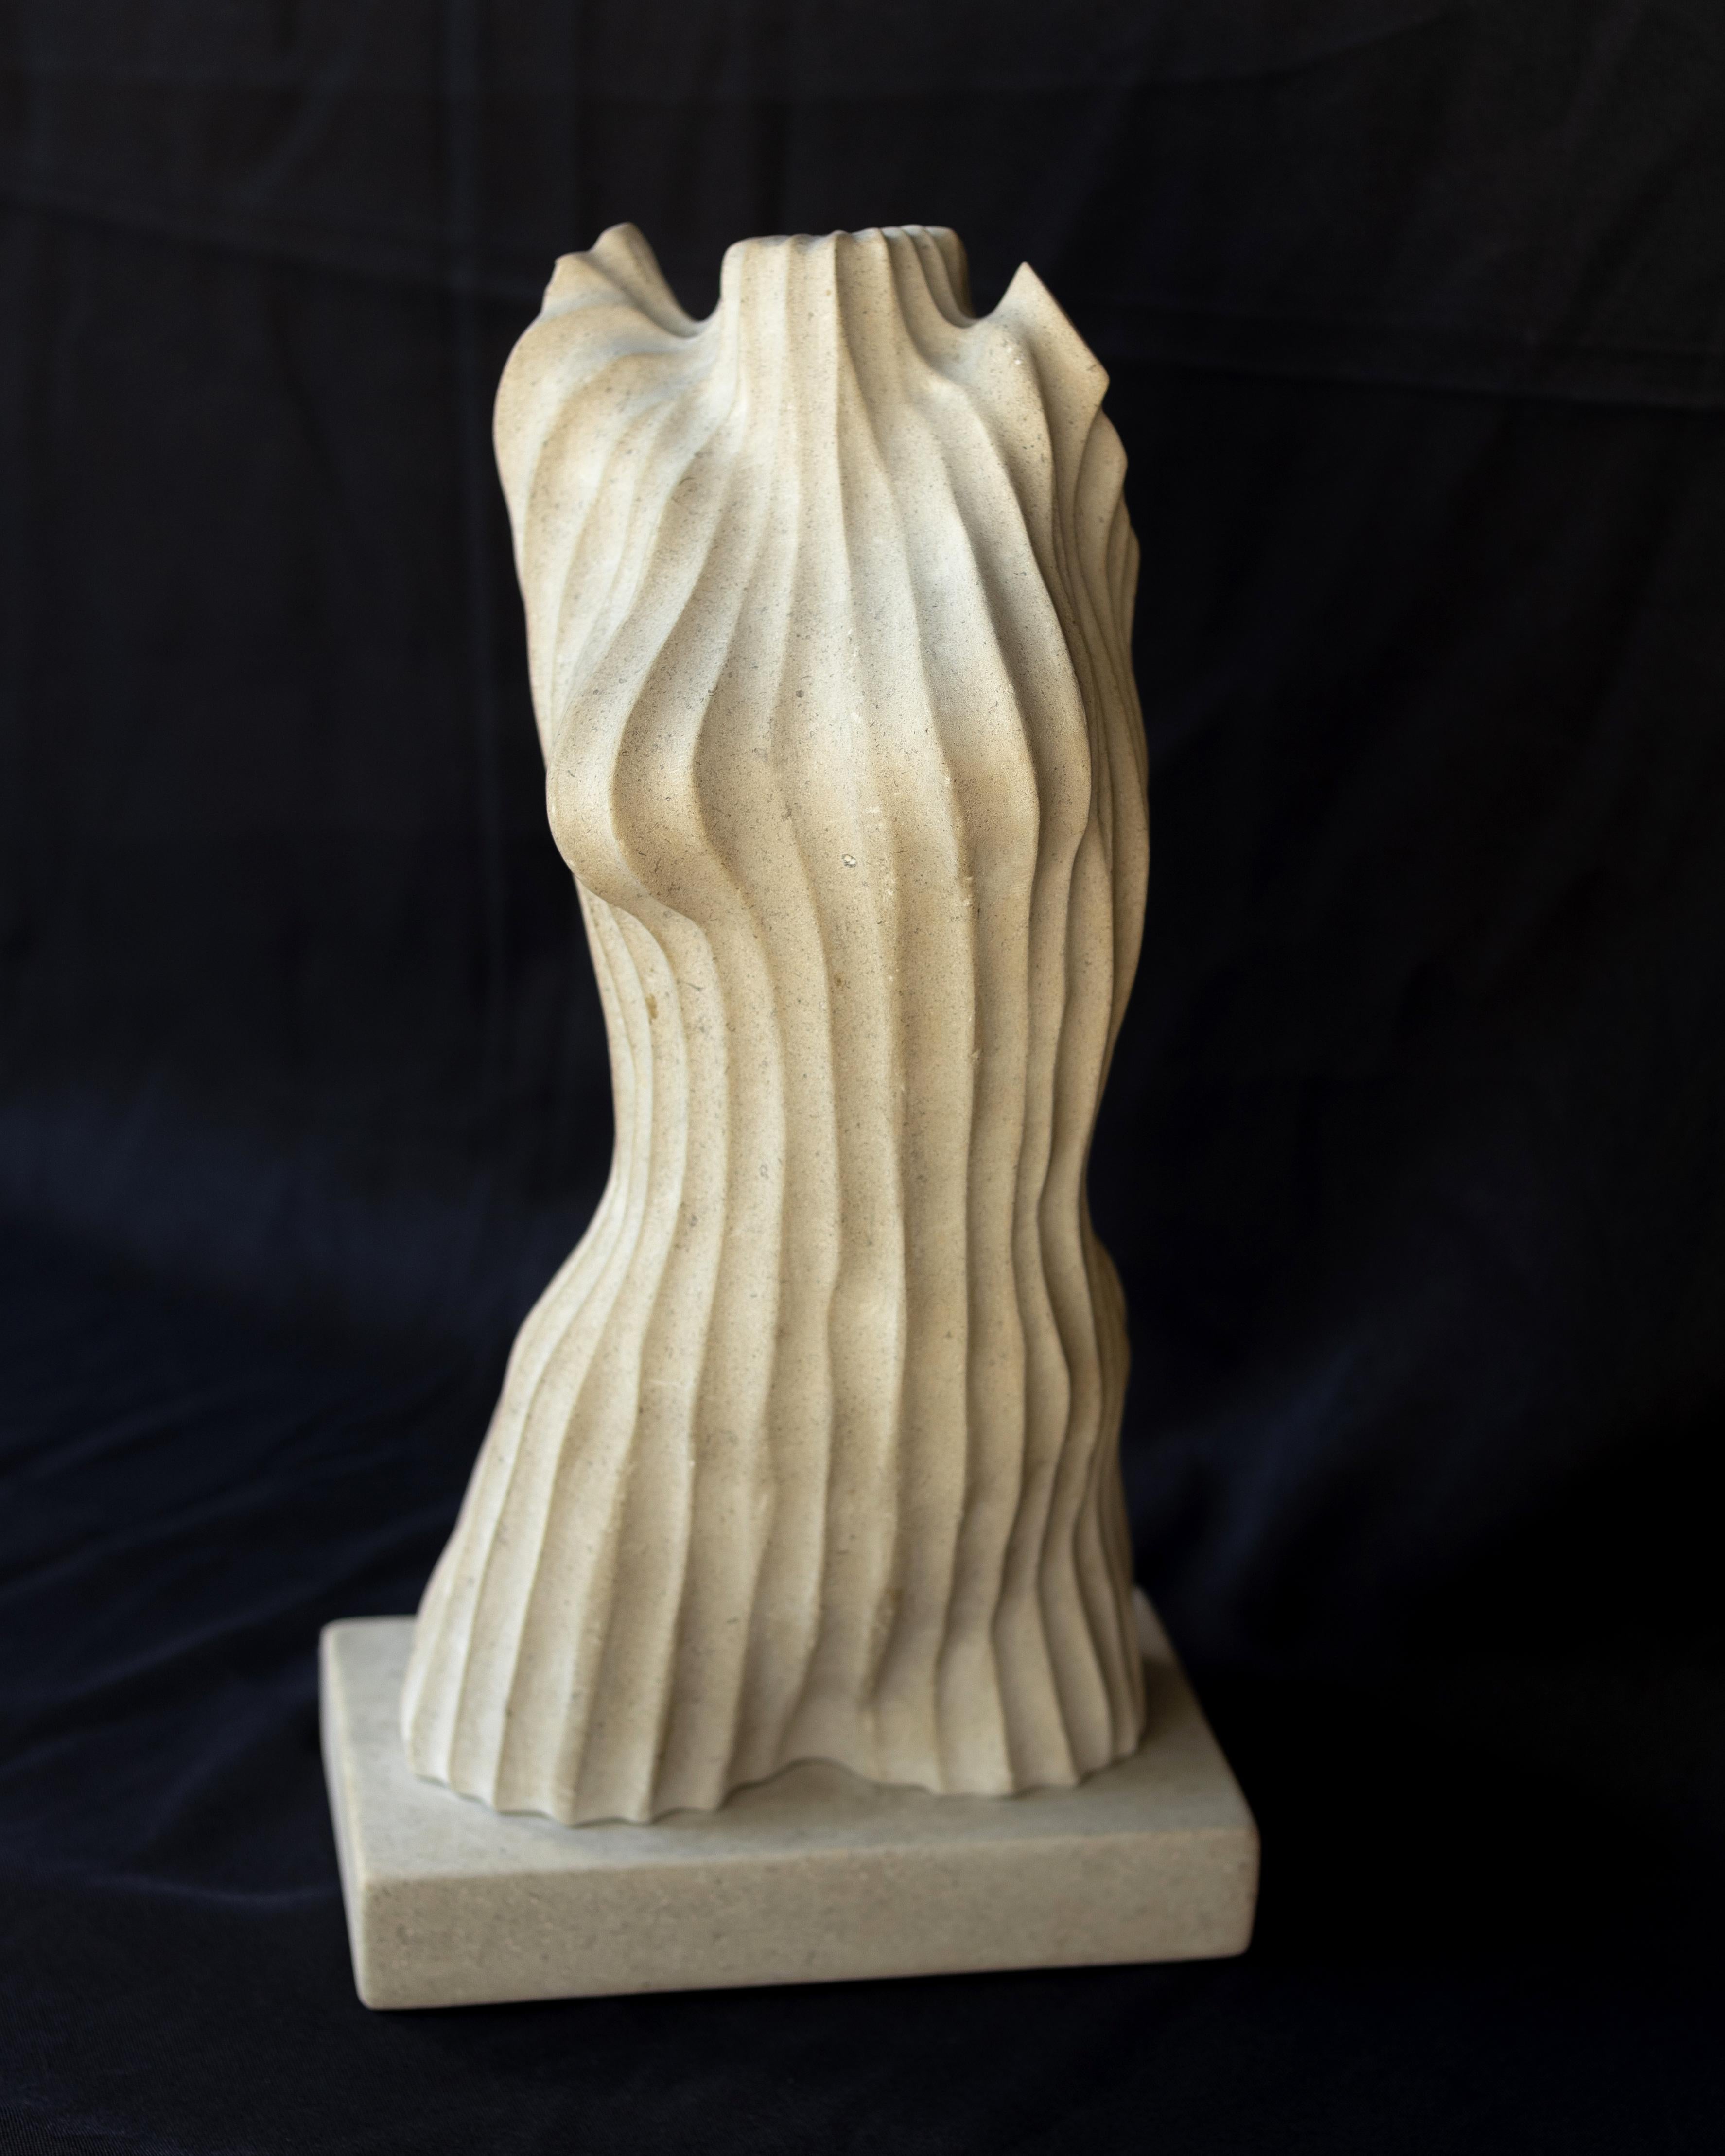 Fluted Figure - Sculpture by Mark P. Williamson